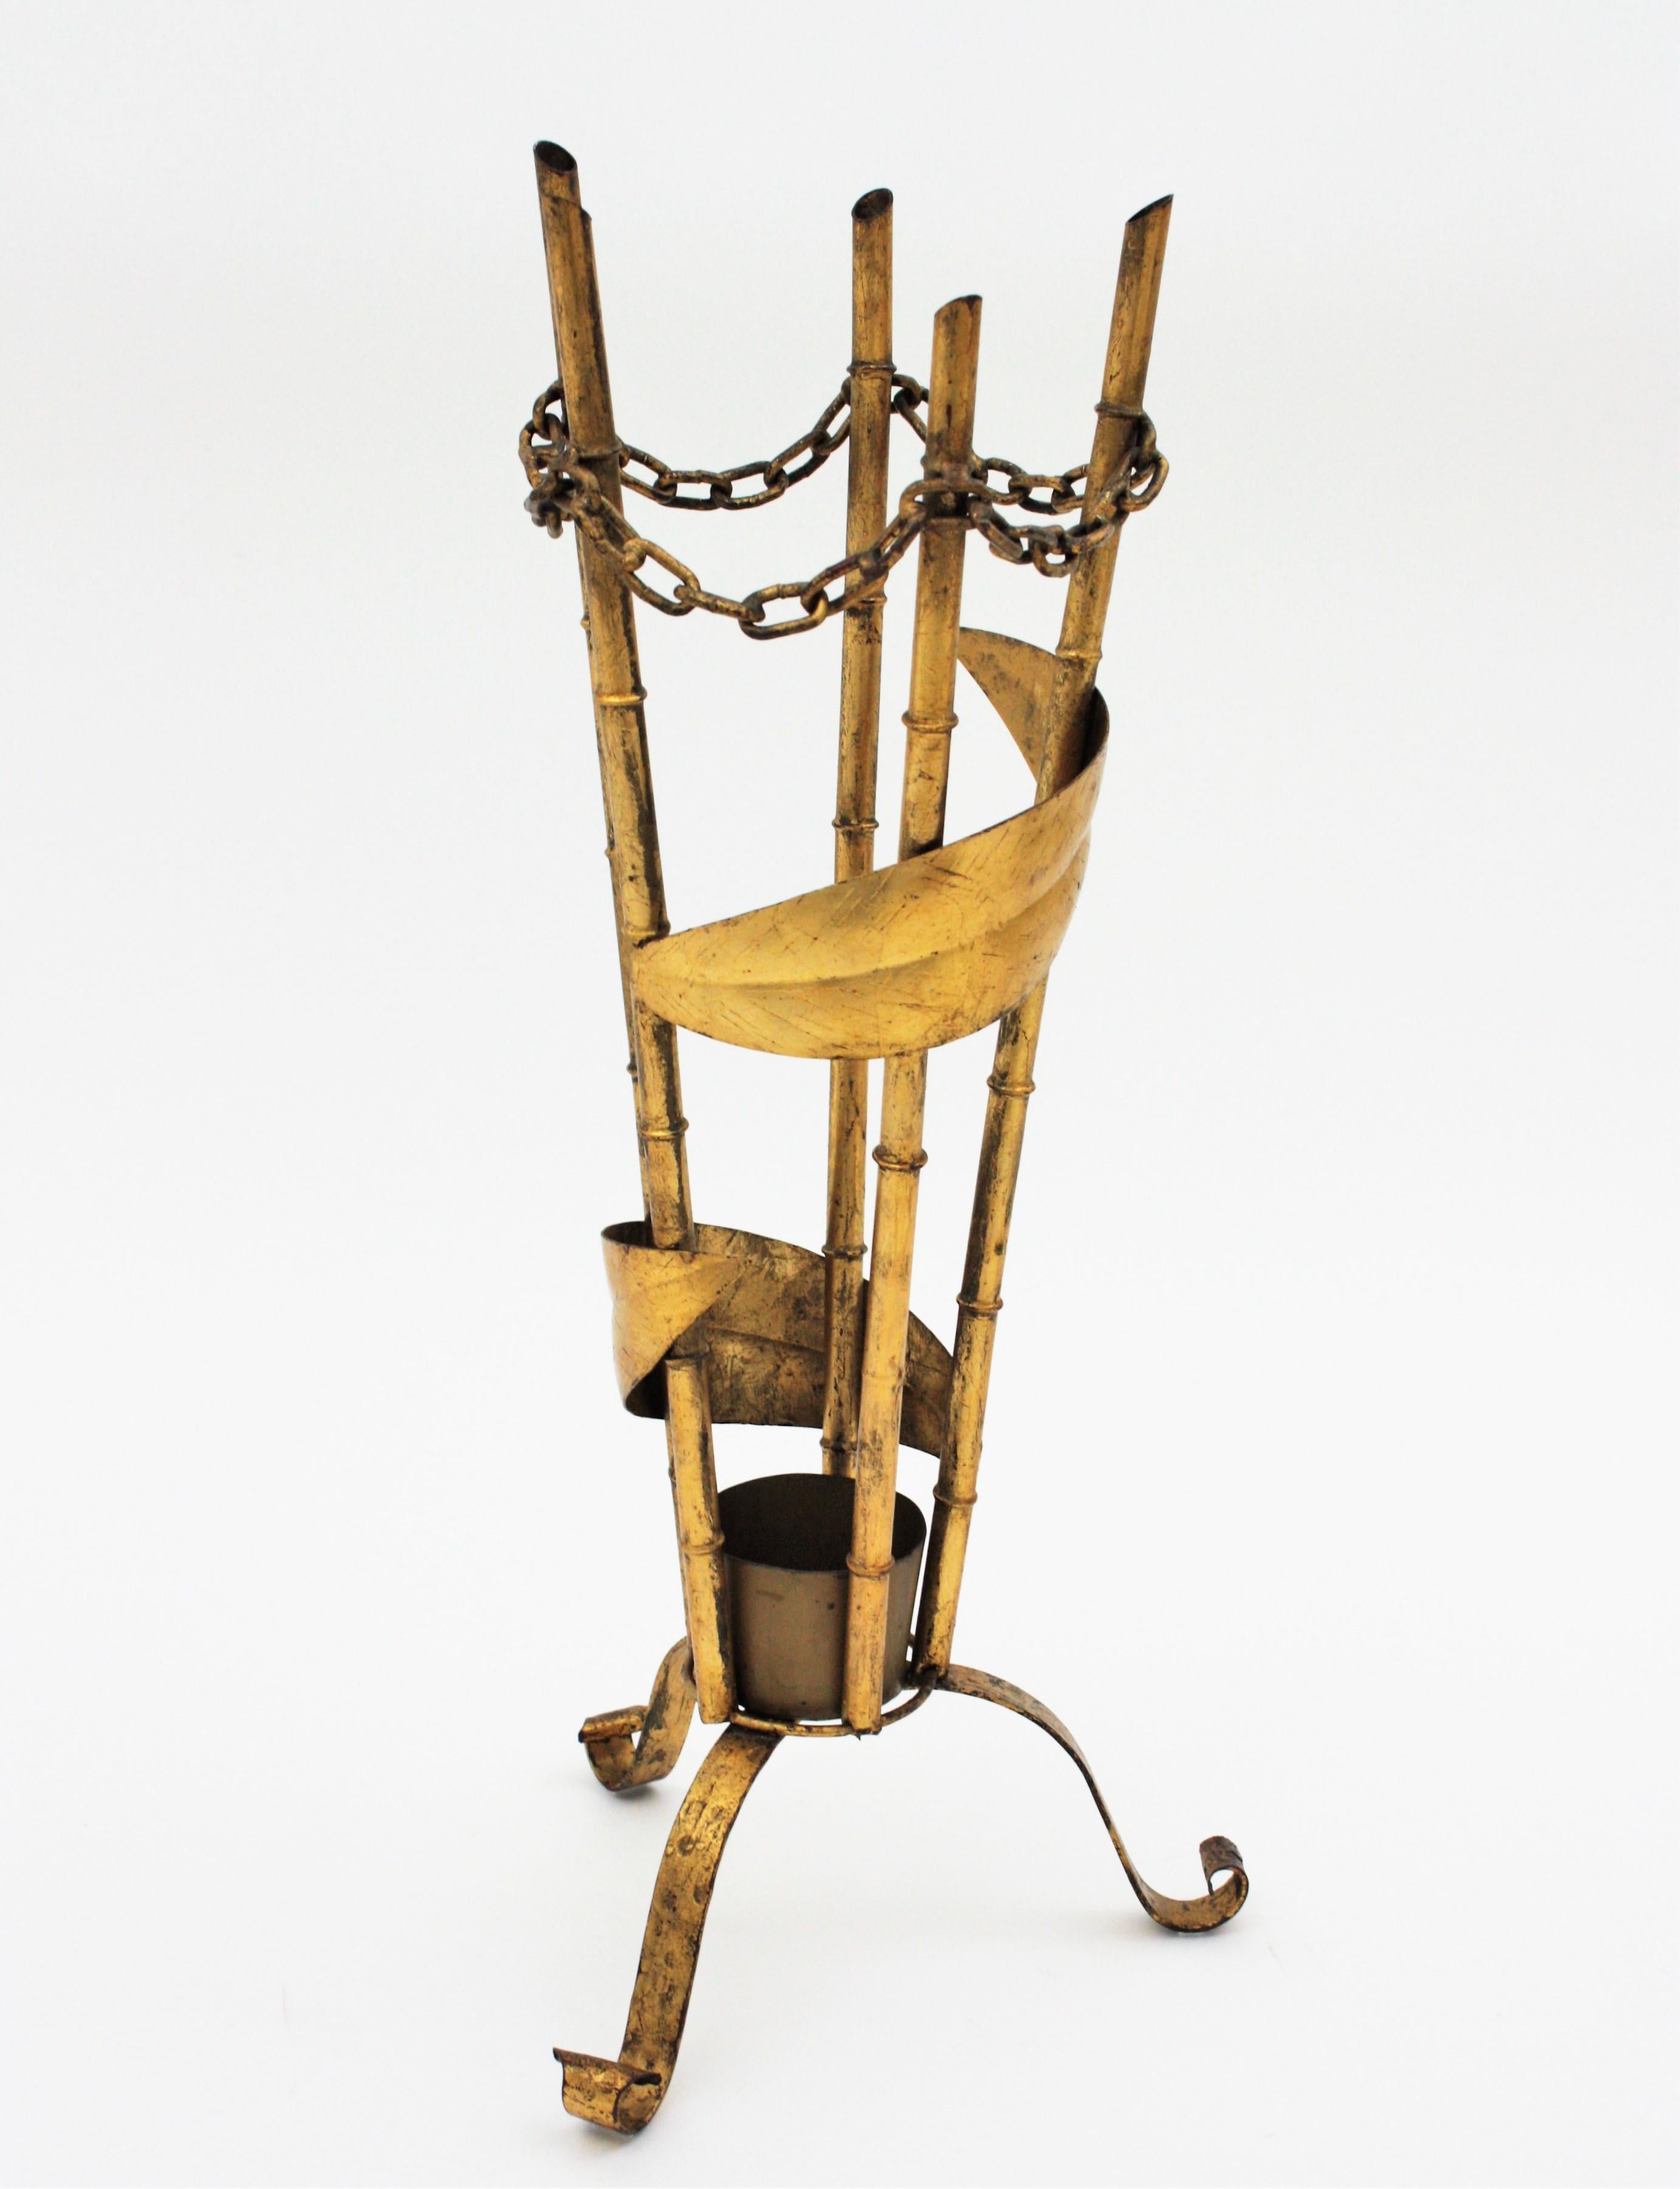 Nice gilt wrought iron faux bamboo umbrella stand with chain link accents. Spain, 1940s-1950s.
This hand forged umbrella stand features a tripod base holding a faux bamboo iron sctructure ornamented with chain-link and leaf accents. It has a